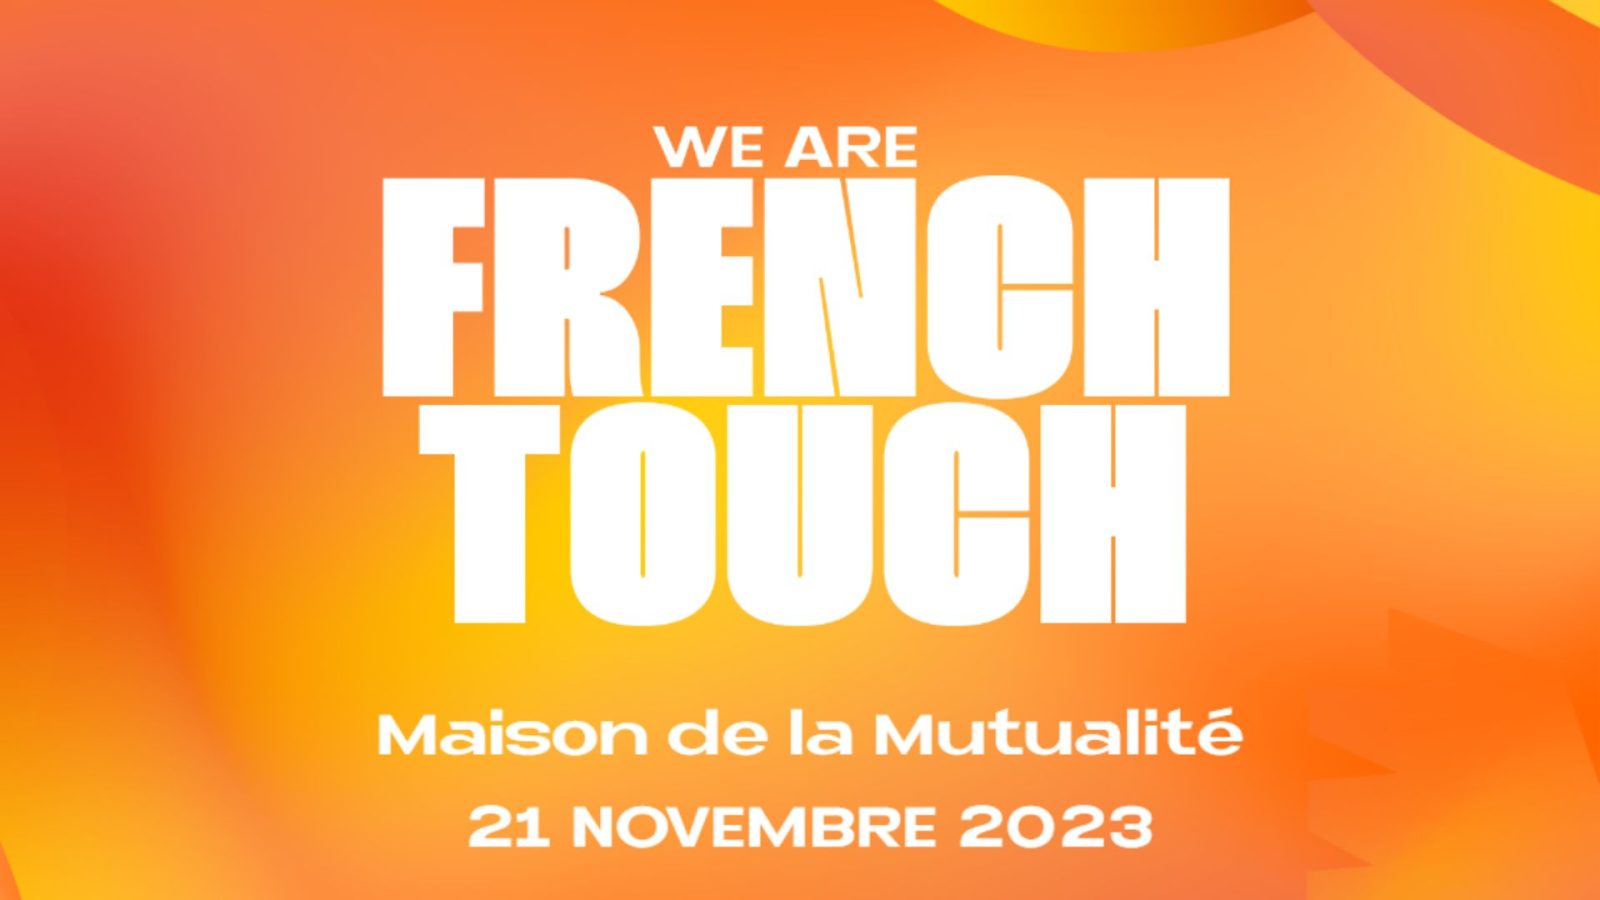 We Are French Touch